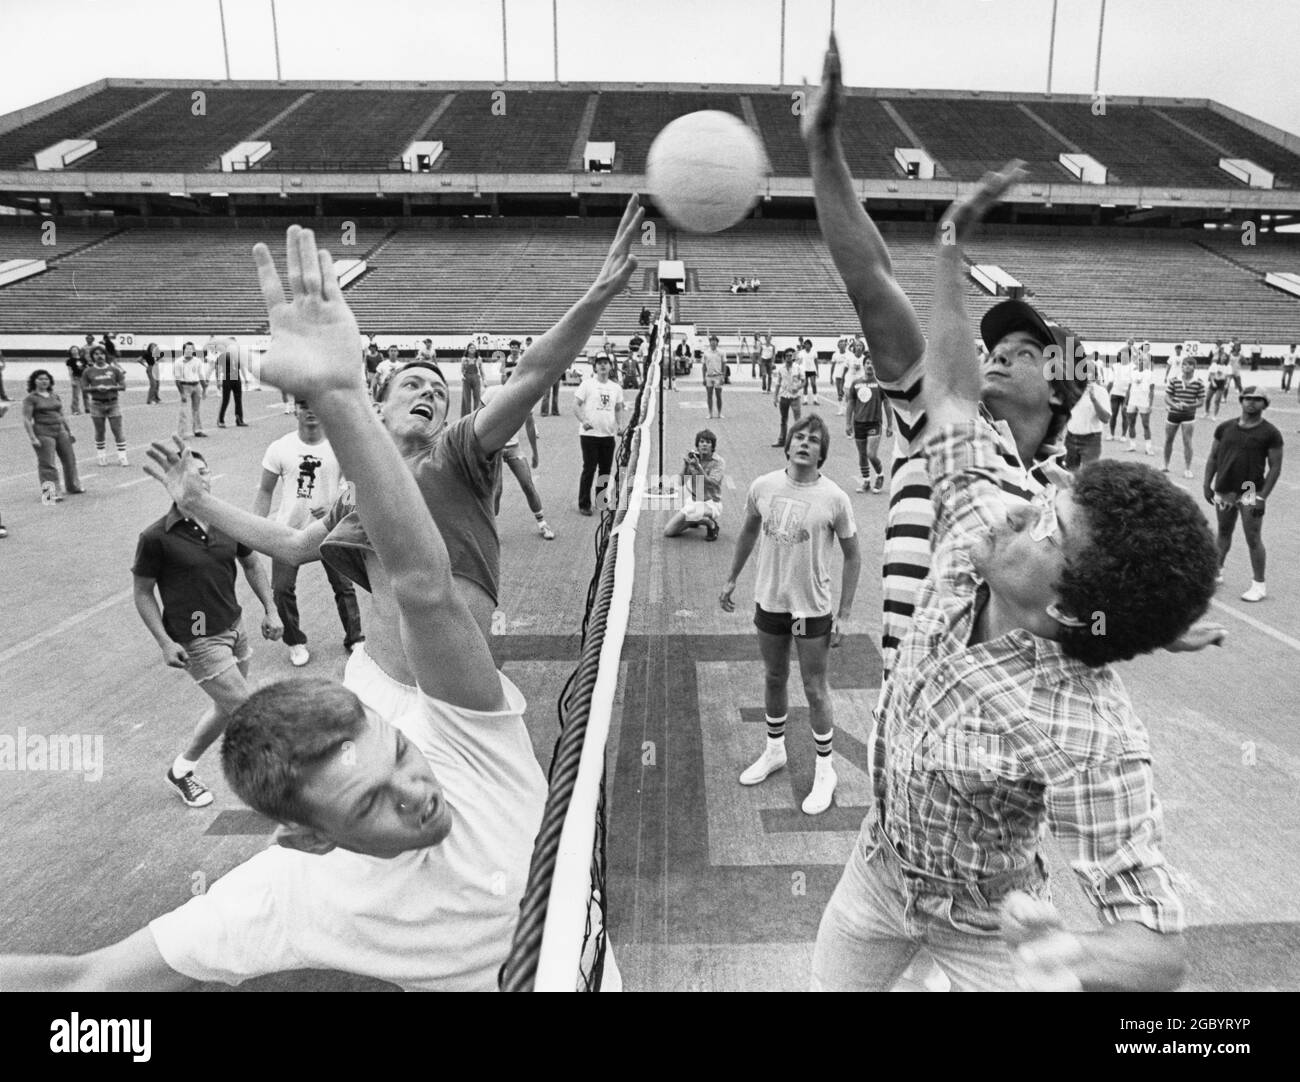 College Station Texas, 1978: 400 Texas A&M University students play in a marathon recreational volleyball game inside the school's football stadium in an attempt to set a Guinness Book of World Records mark for world's largest volleyball game. ©Bob Daemmrich Stock Photo